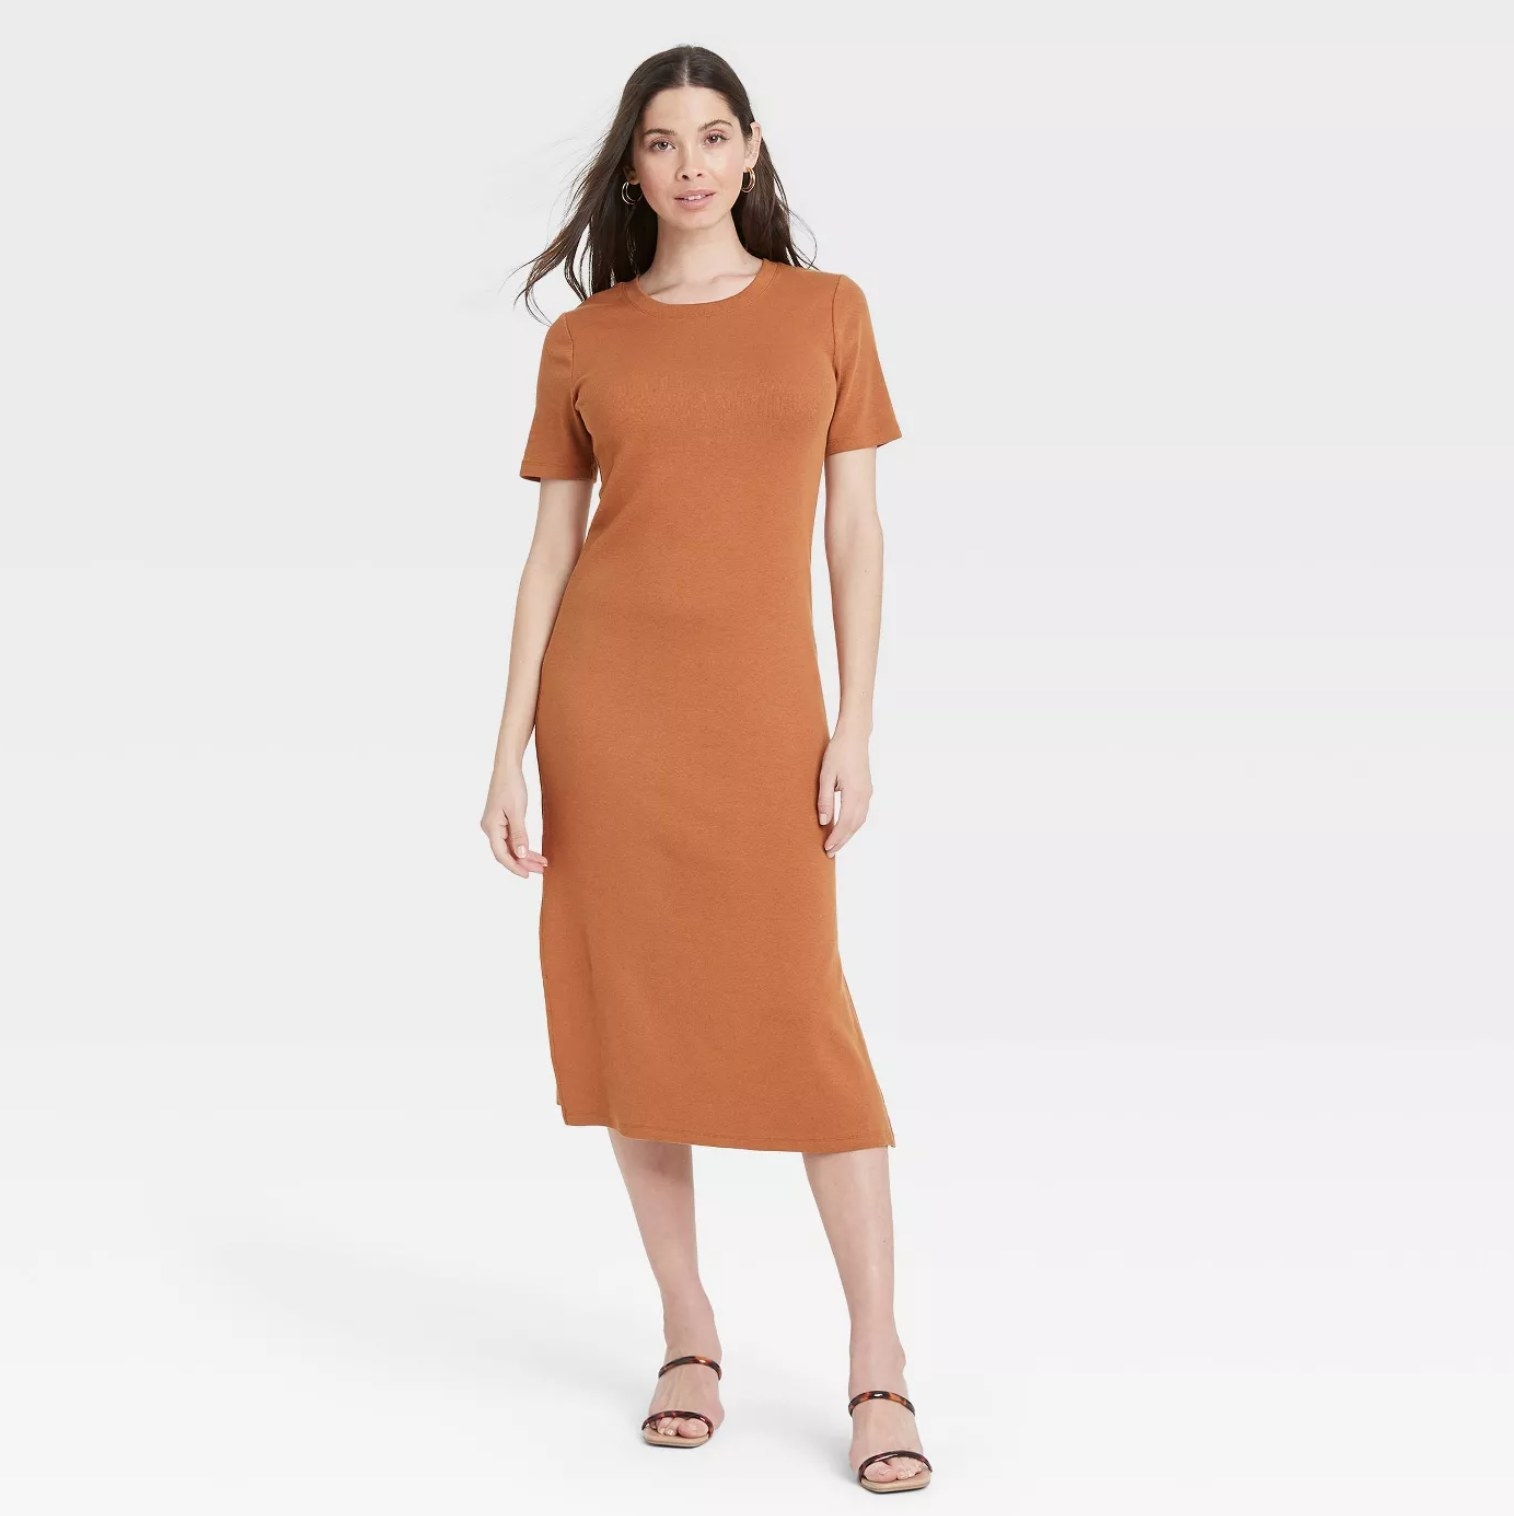 model wearing the dress in orange with sandals